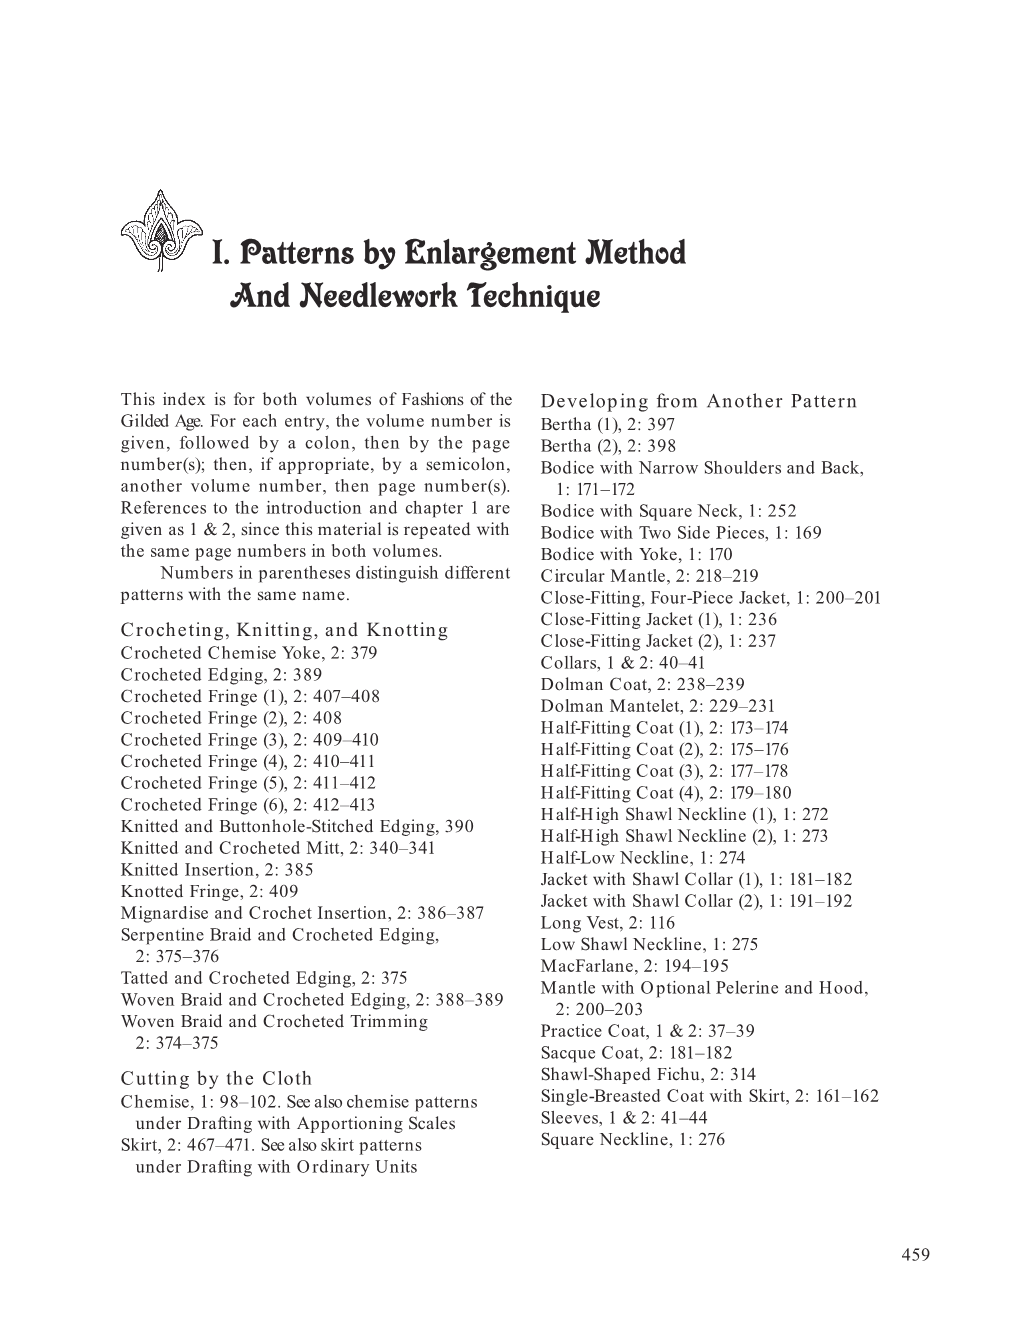 I. Patterns by Enlargement Method and Needlework Technique